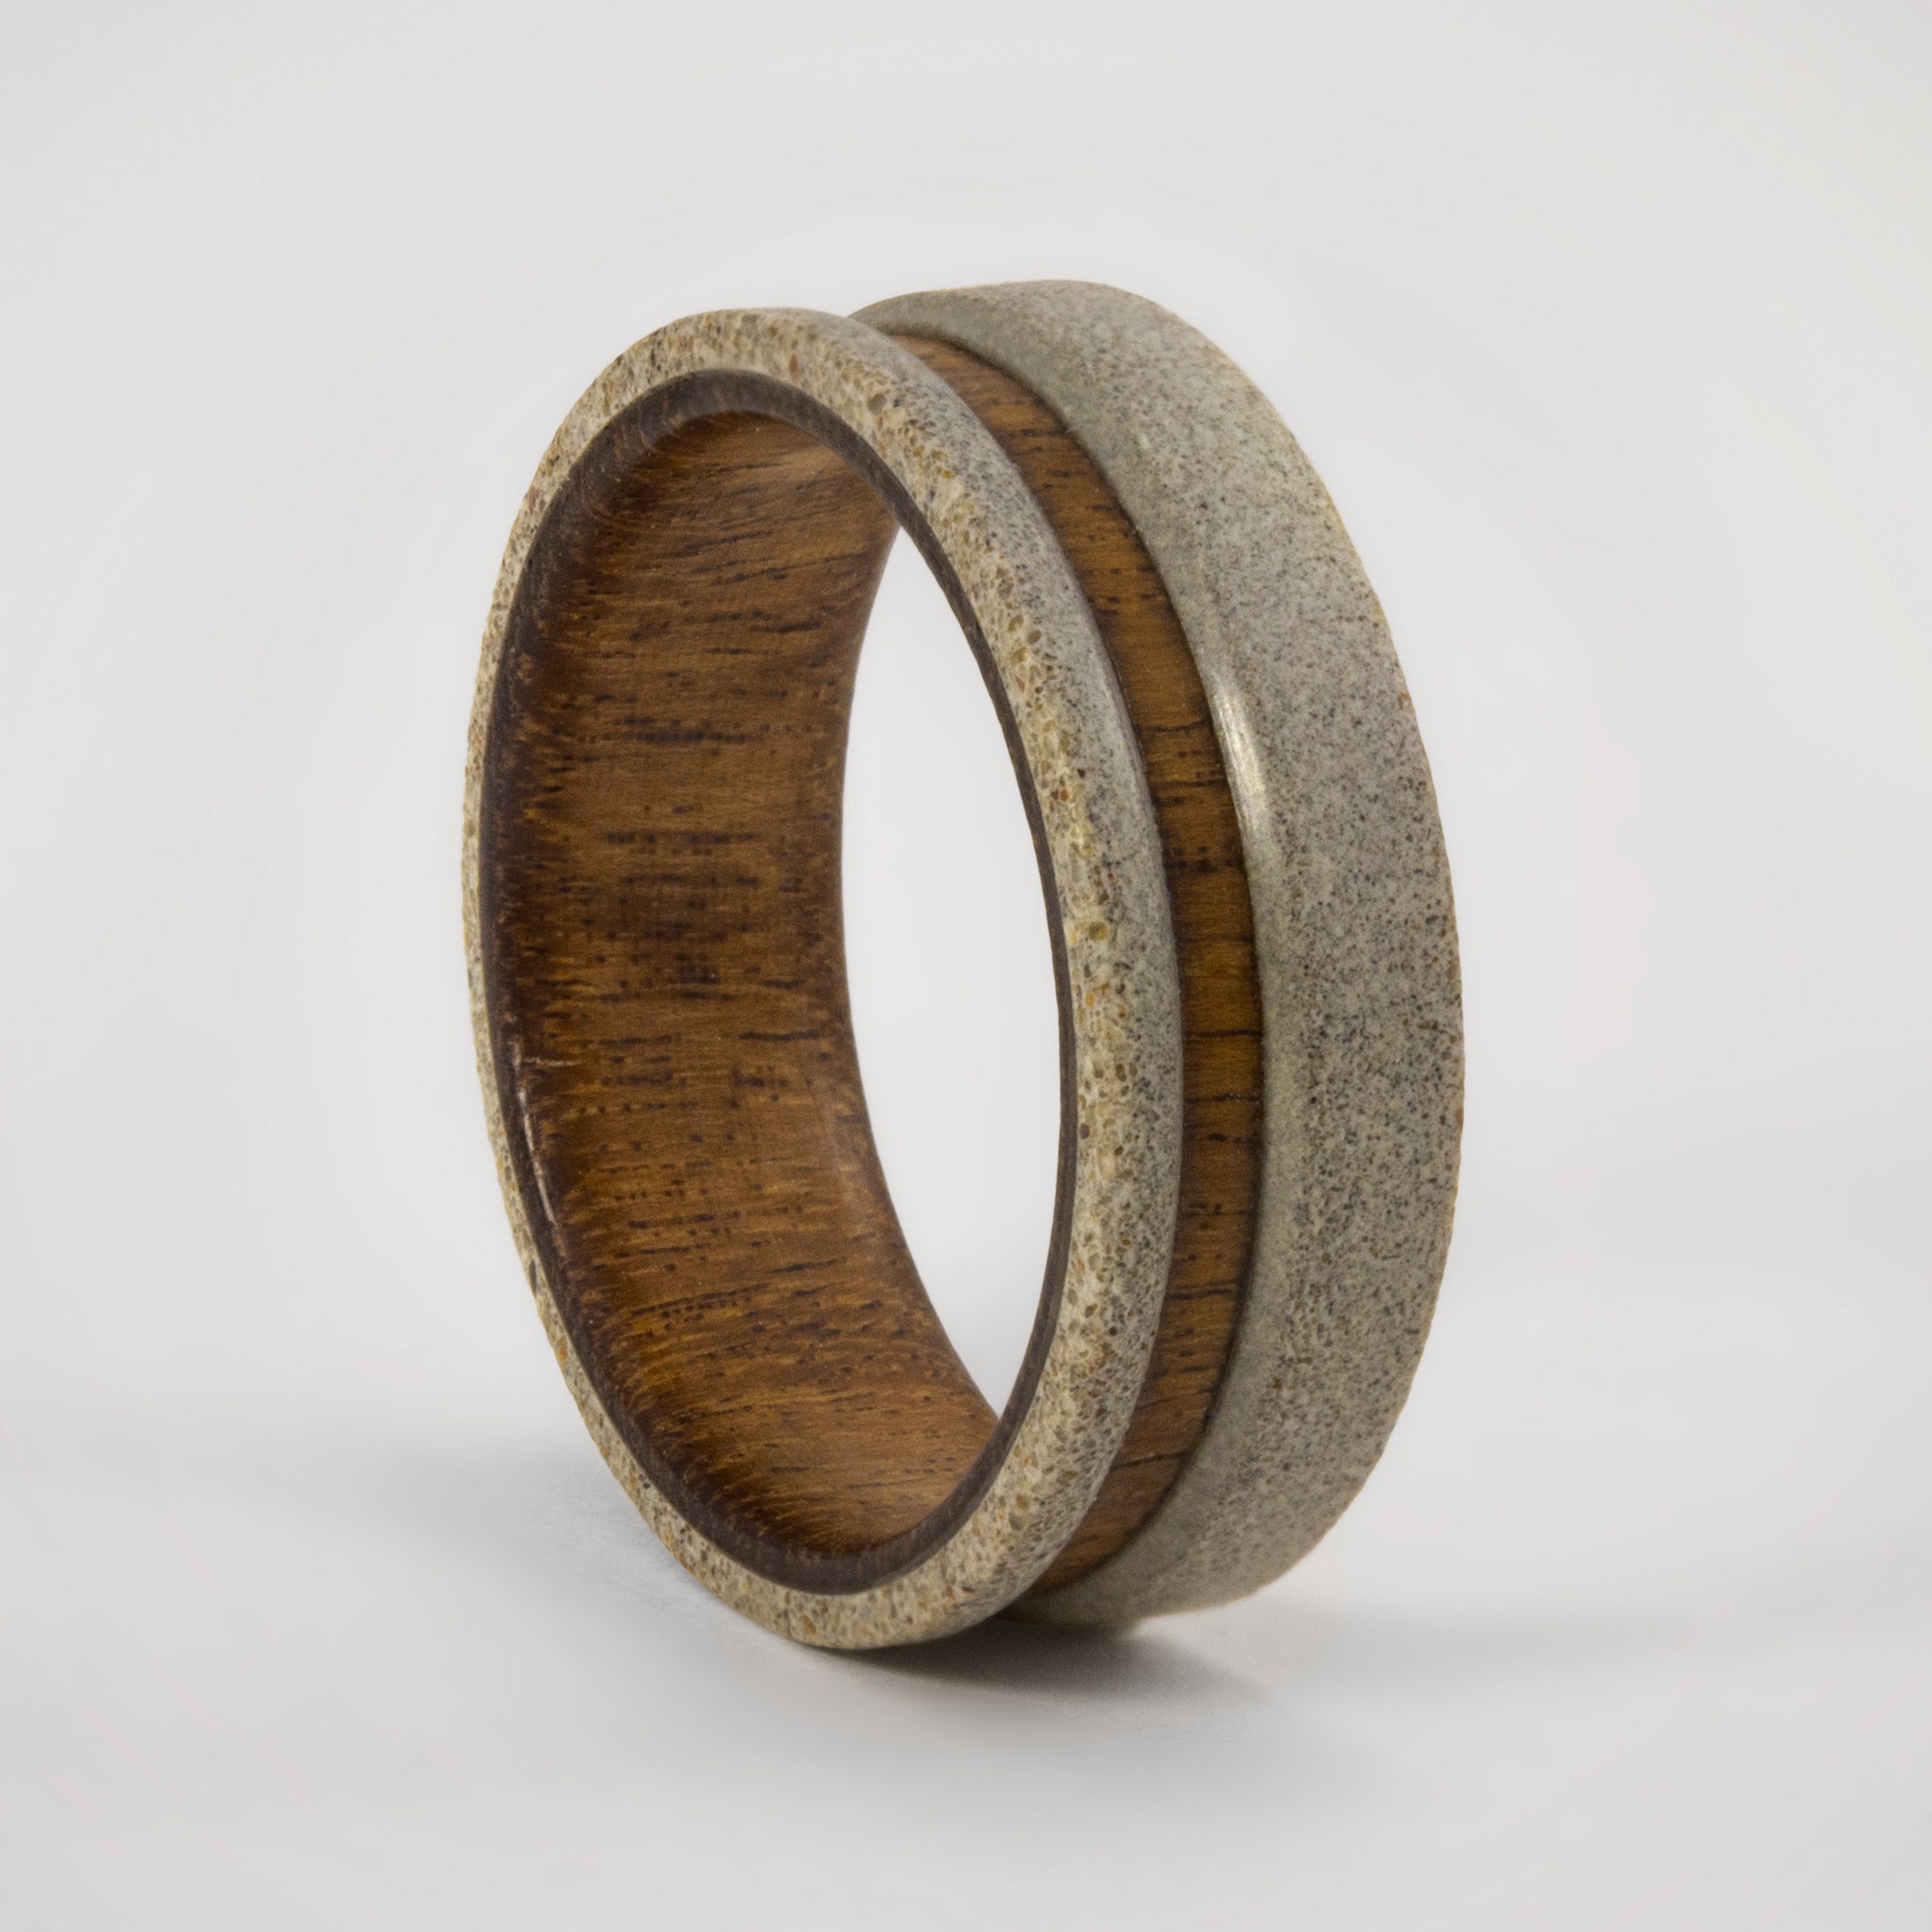 Light Gray concrete and incense wood ring